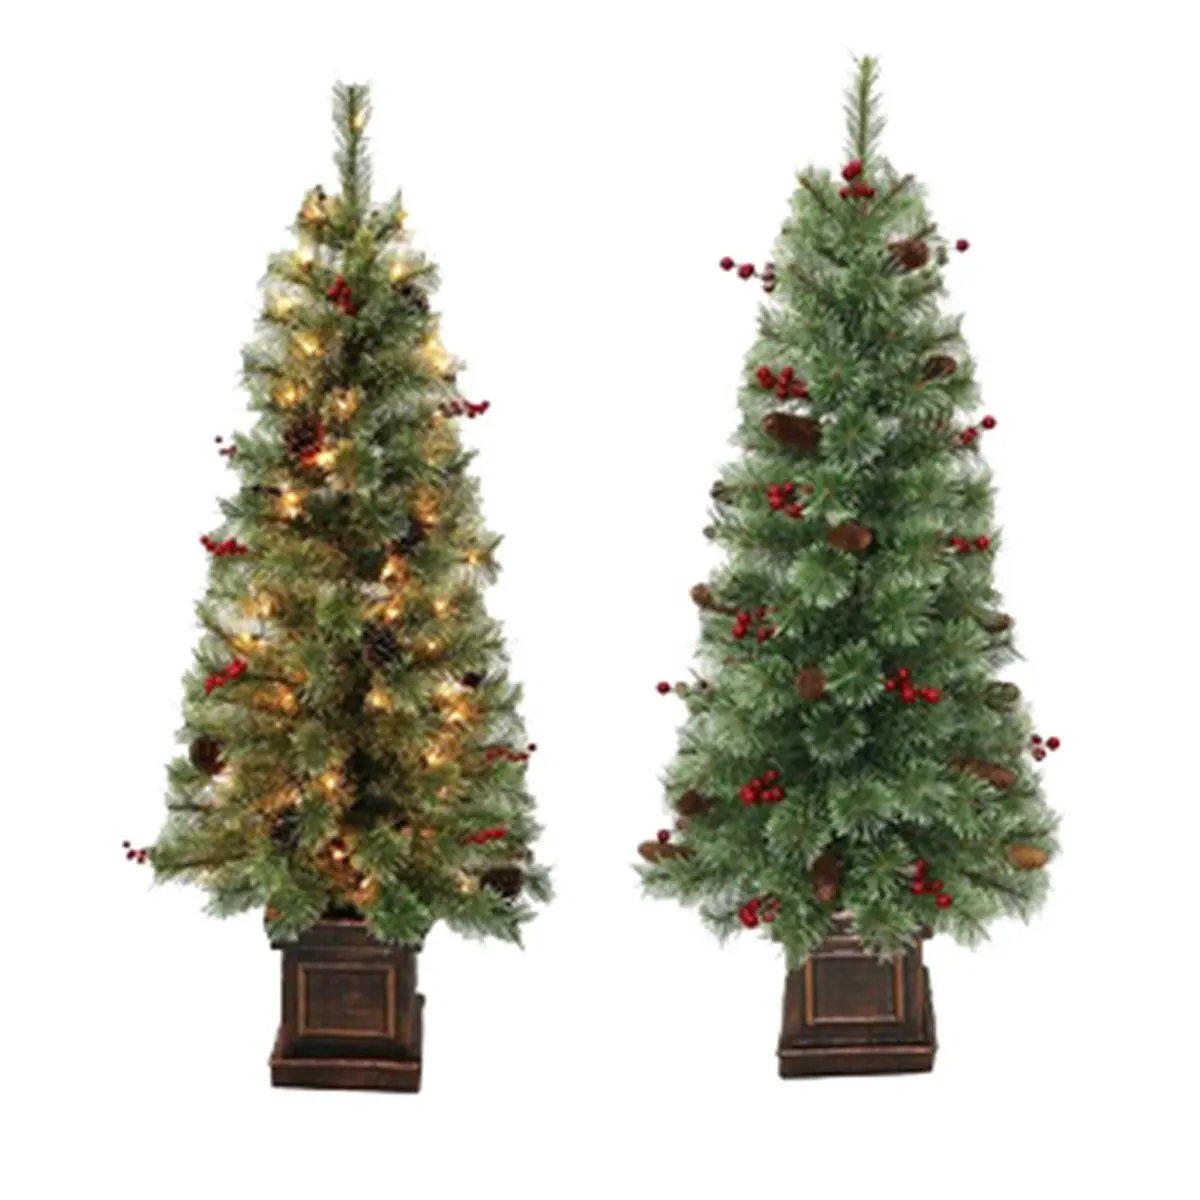 Pre-lit Mixed Harde Needle PVC Potted Artificial Christmas Tree Fire proof Eco Friendly Materials Xmas Tree Free Sample